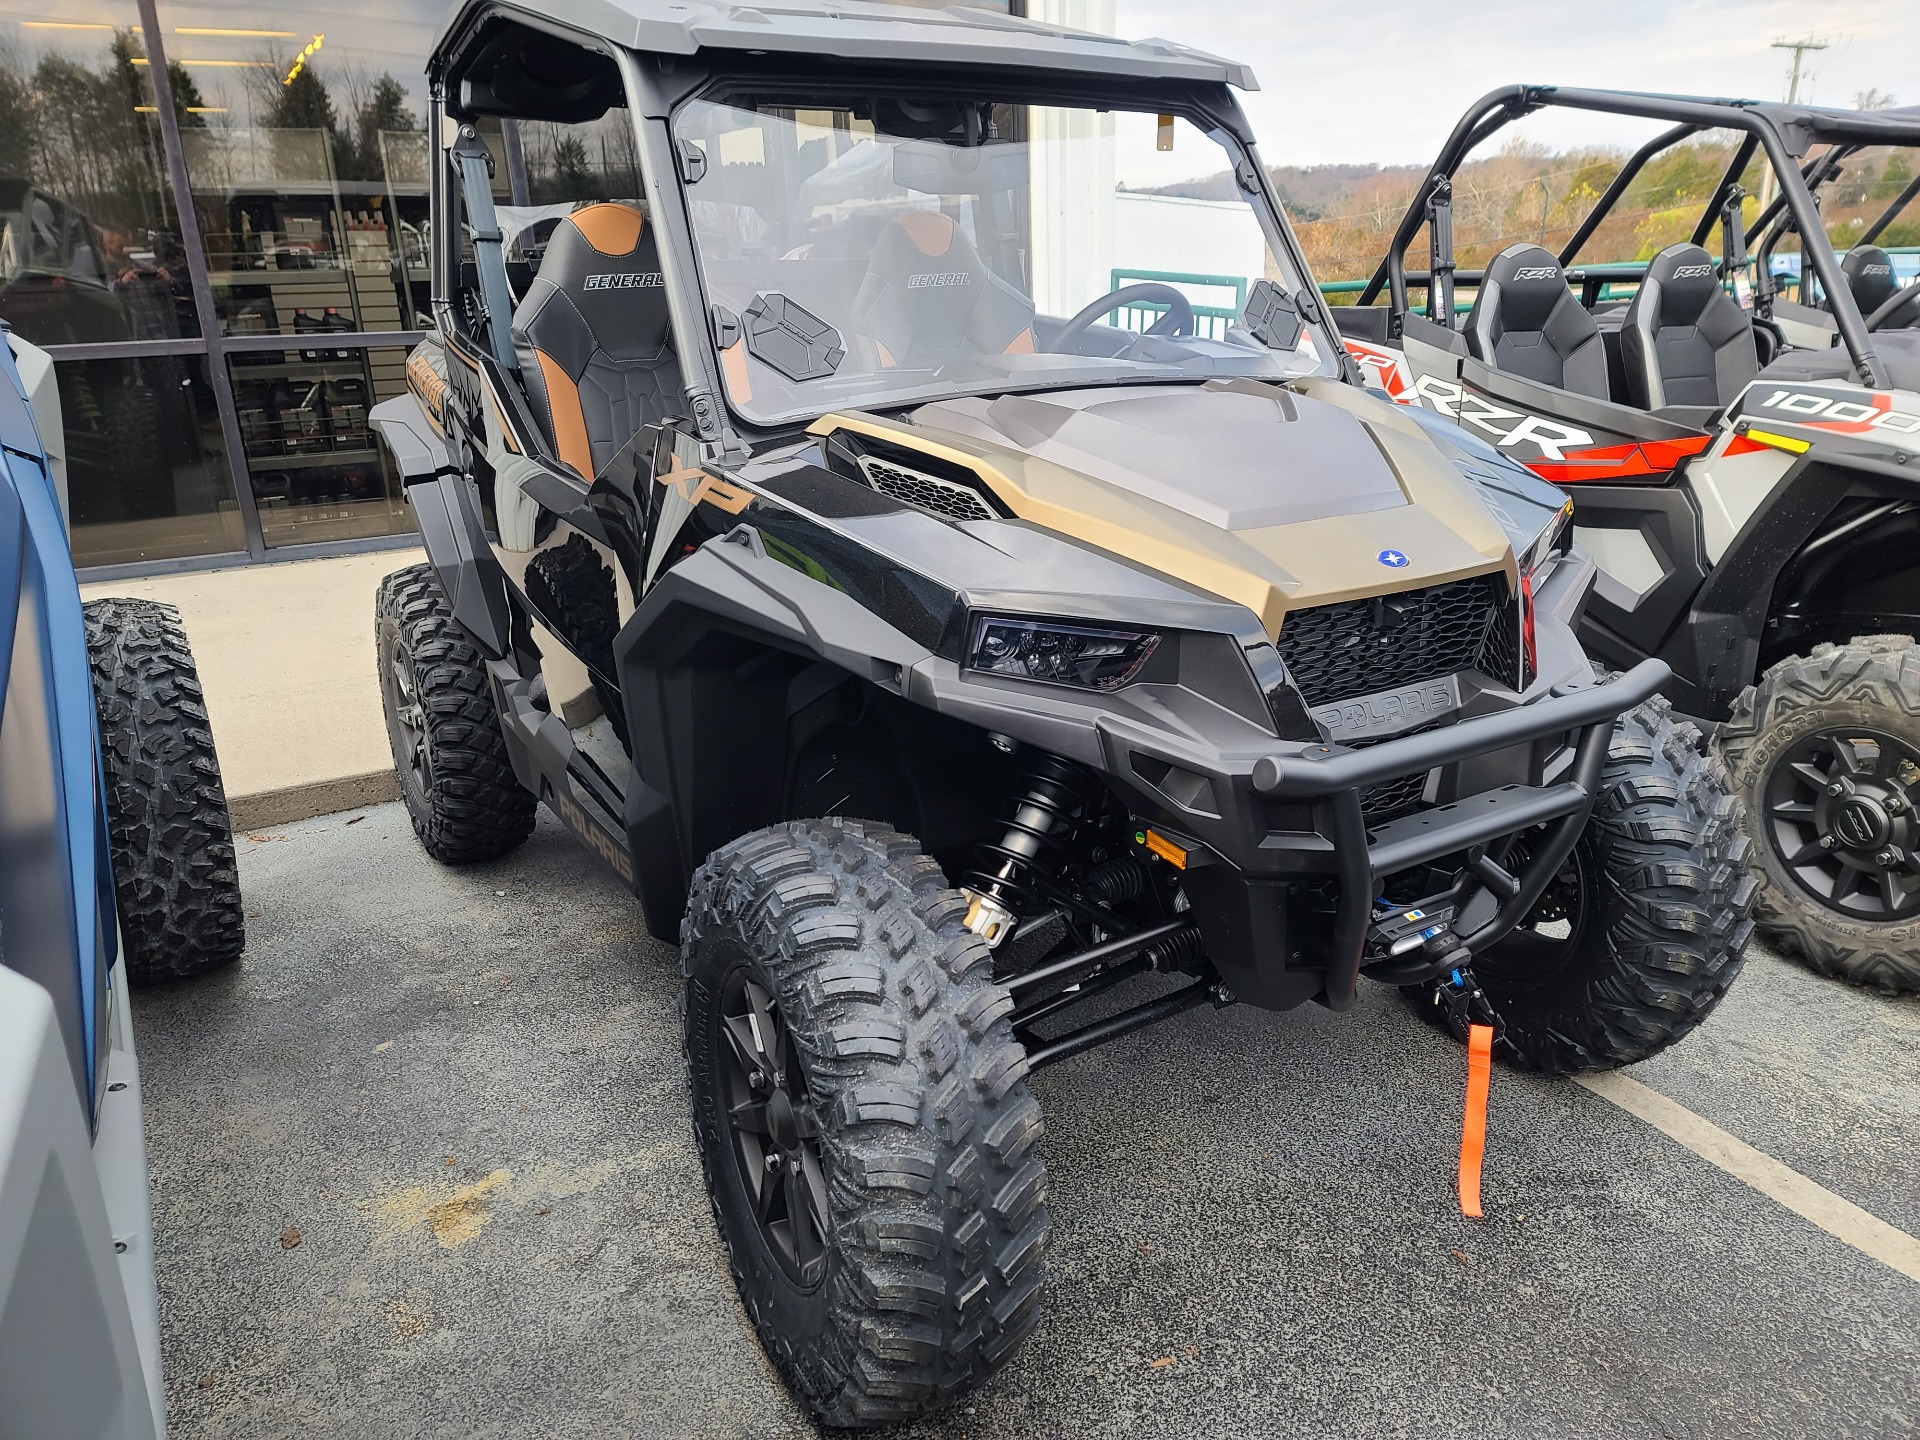 2023 Polaris General XP 1000 Ultimate in Clinton, Tennessee - Photo 1